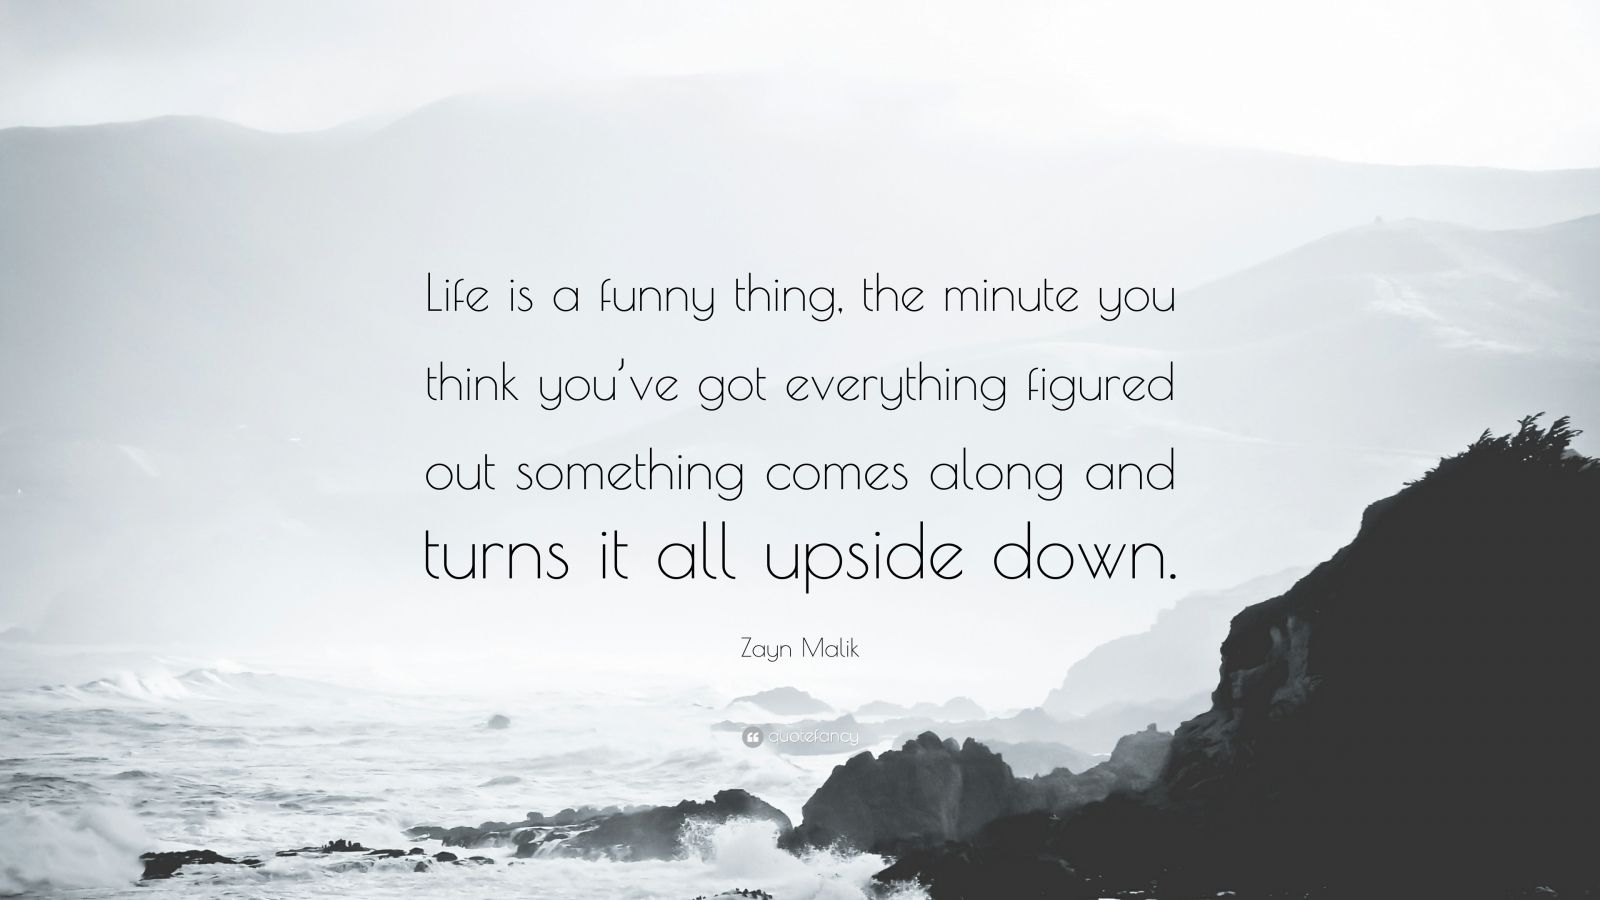 Zayn Malik Quote: “Life is a funny thing, the minute you think you've got  everything figured out something comes along and turns it all ups...”